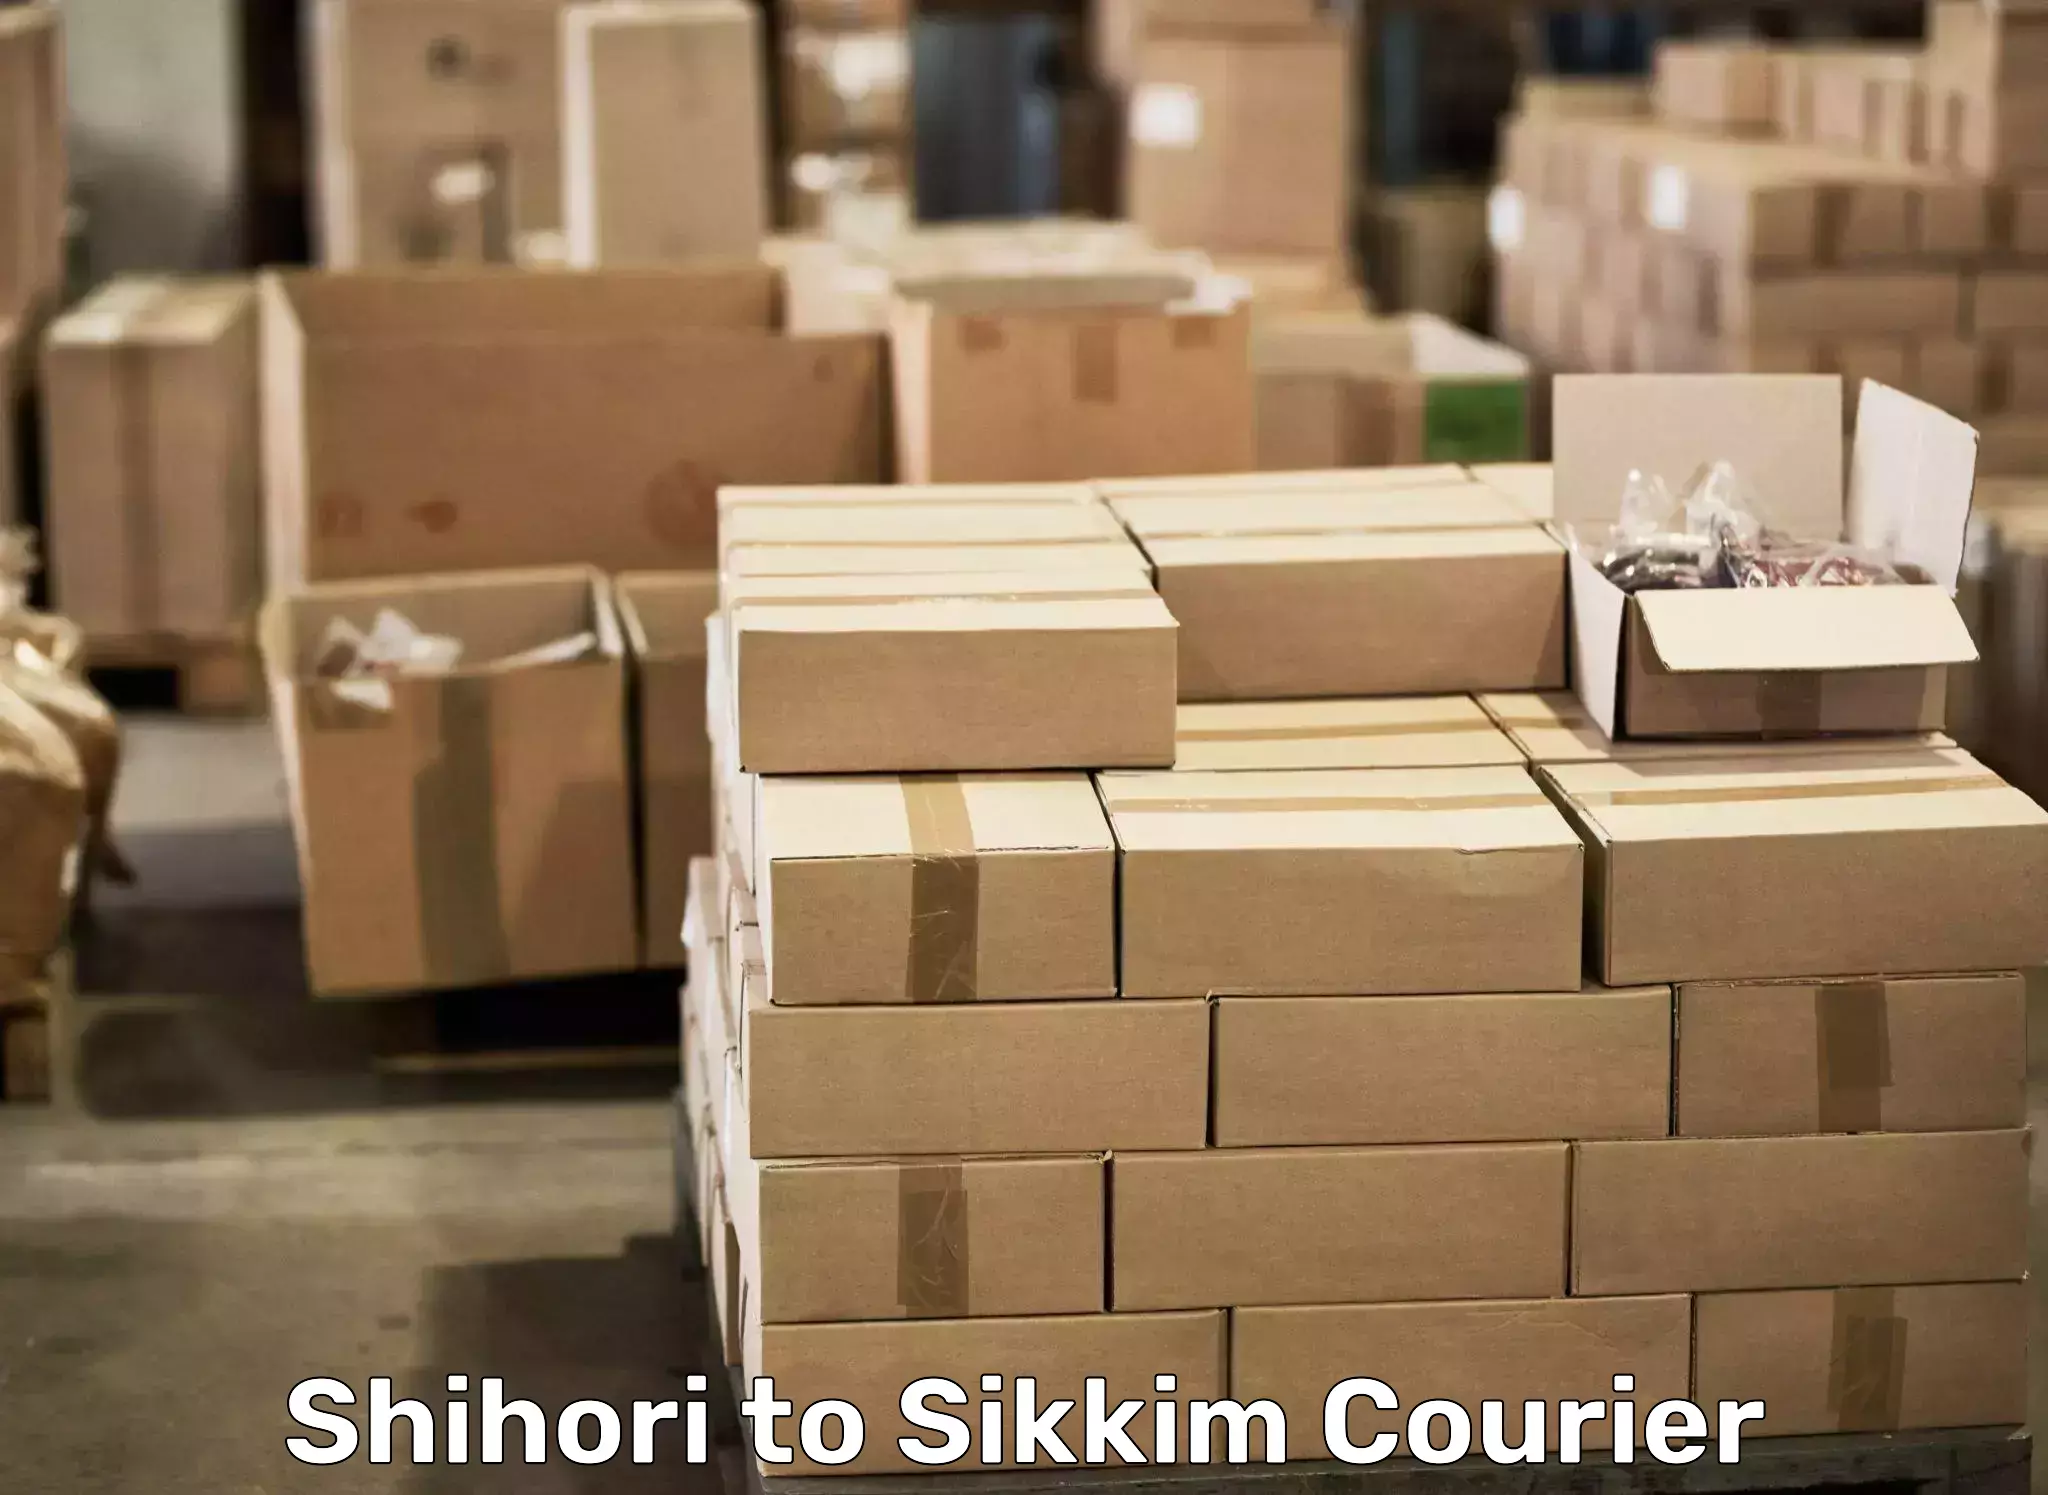 Trusted relocation experts Shihori to Sikkim